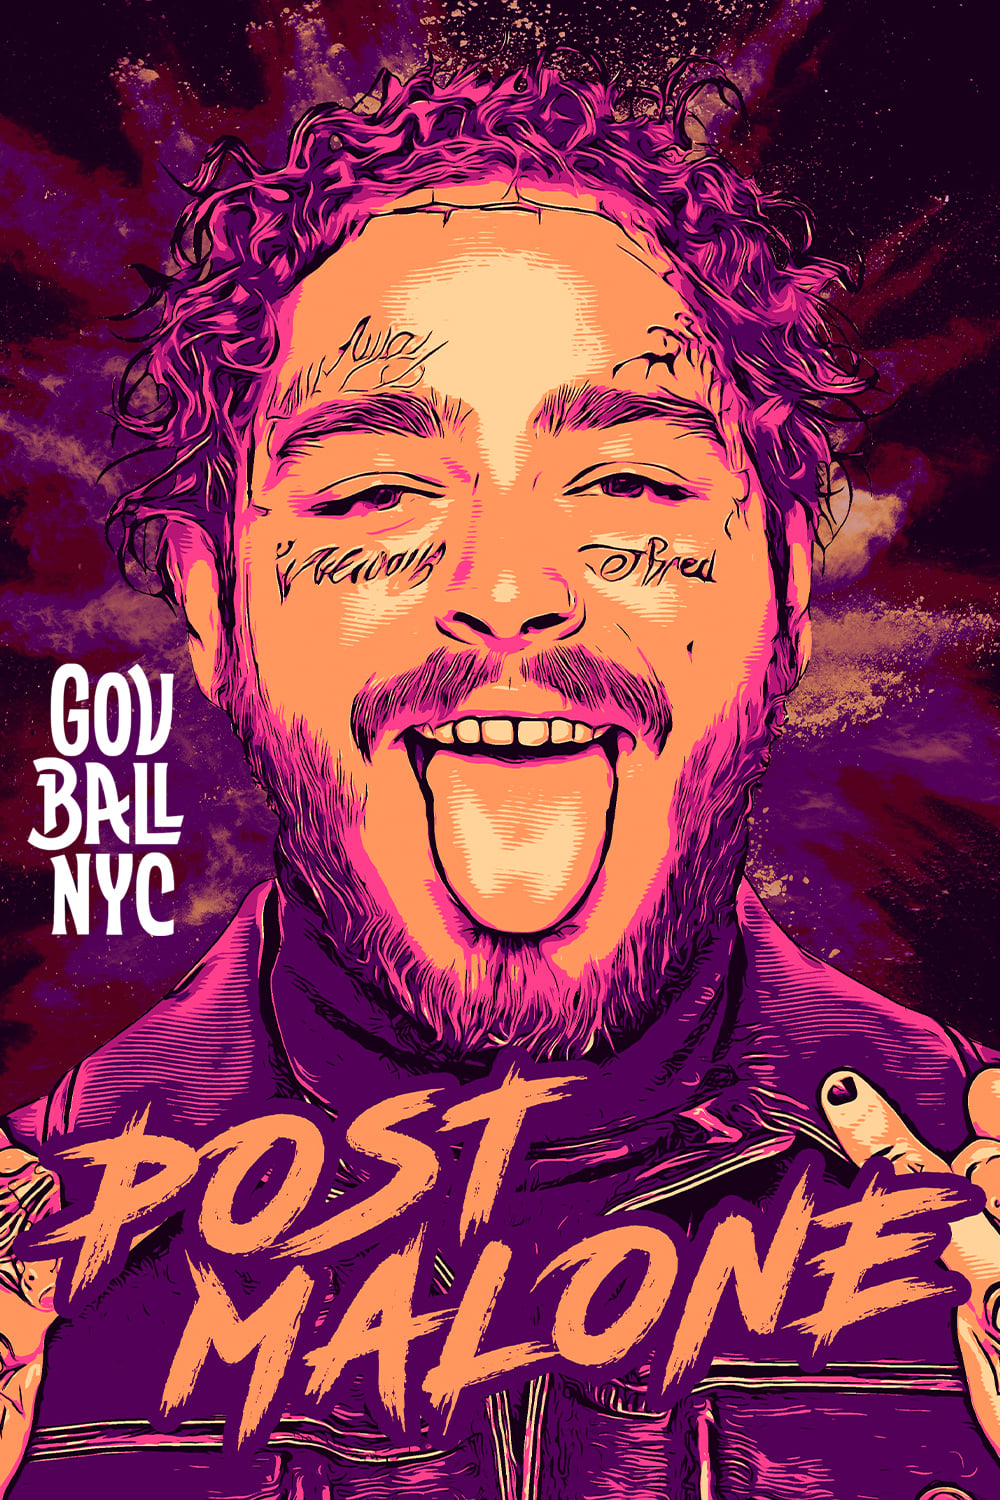 Post Malone - Live at GOV BALL NYC